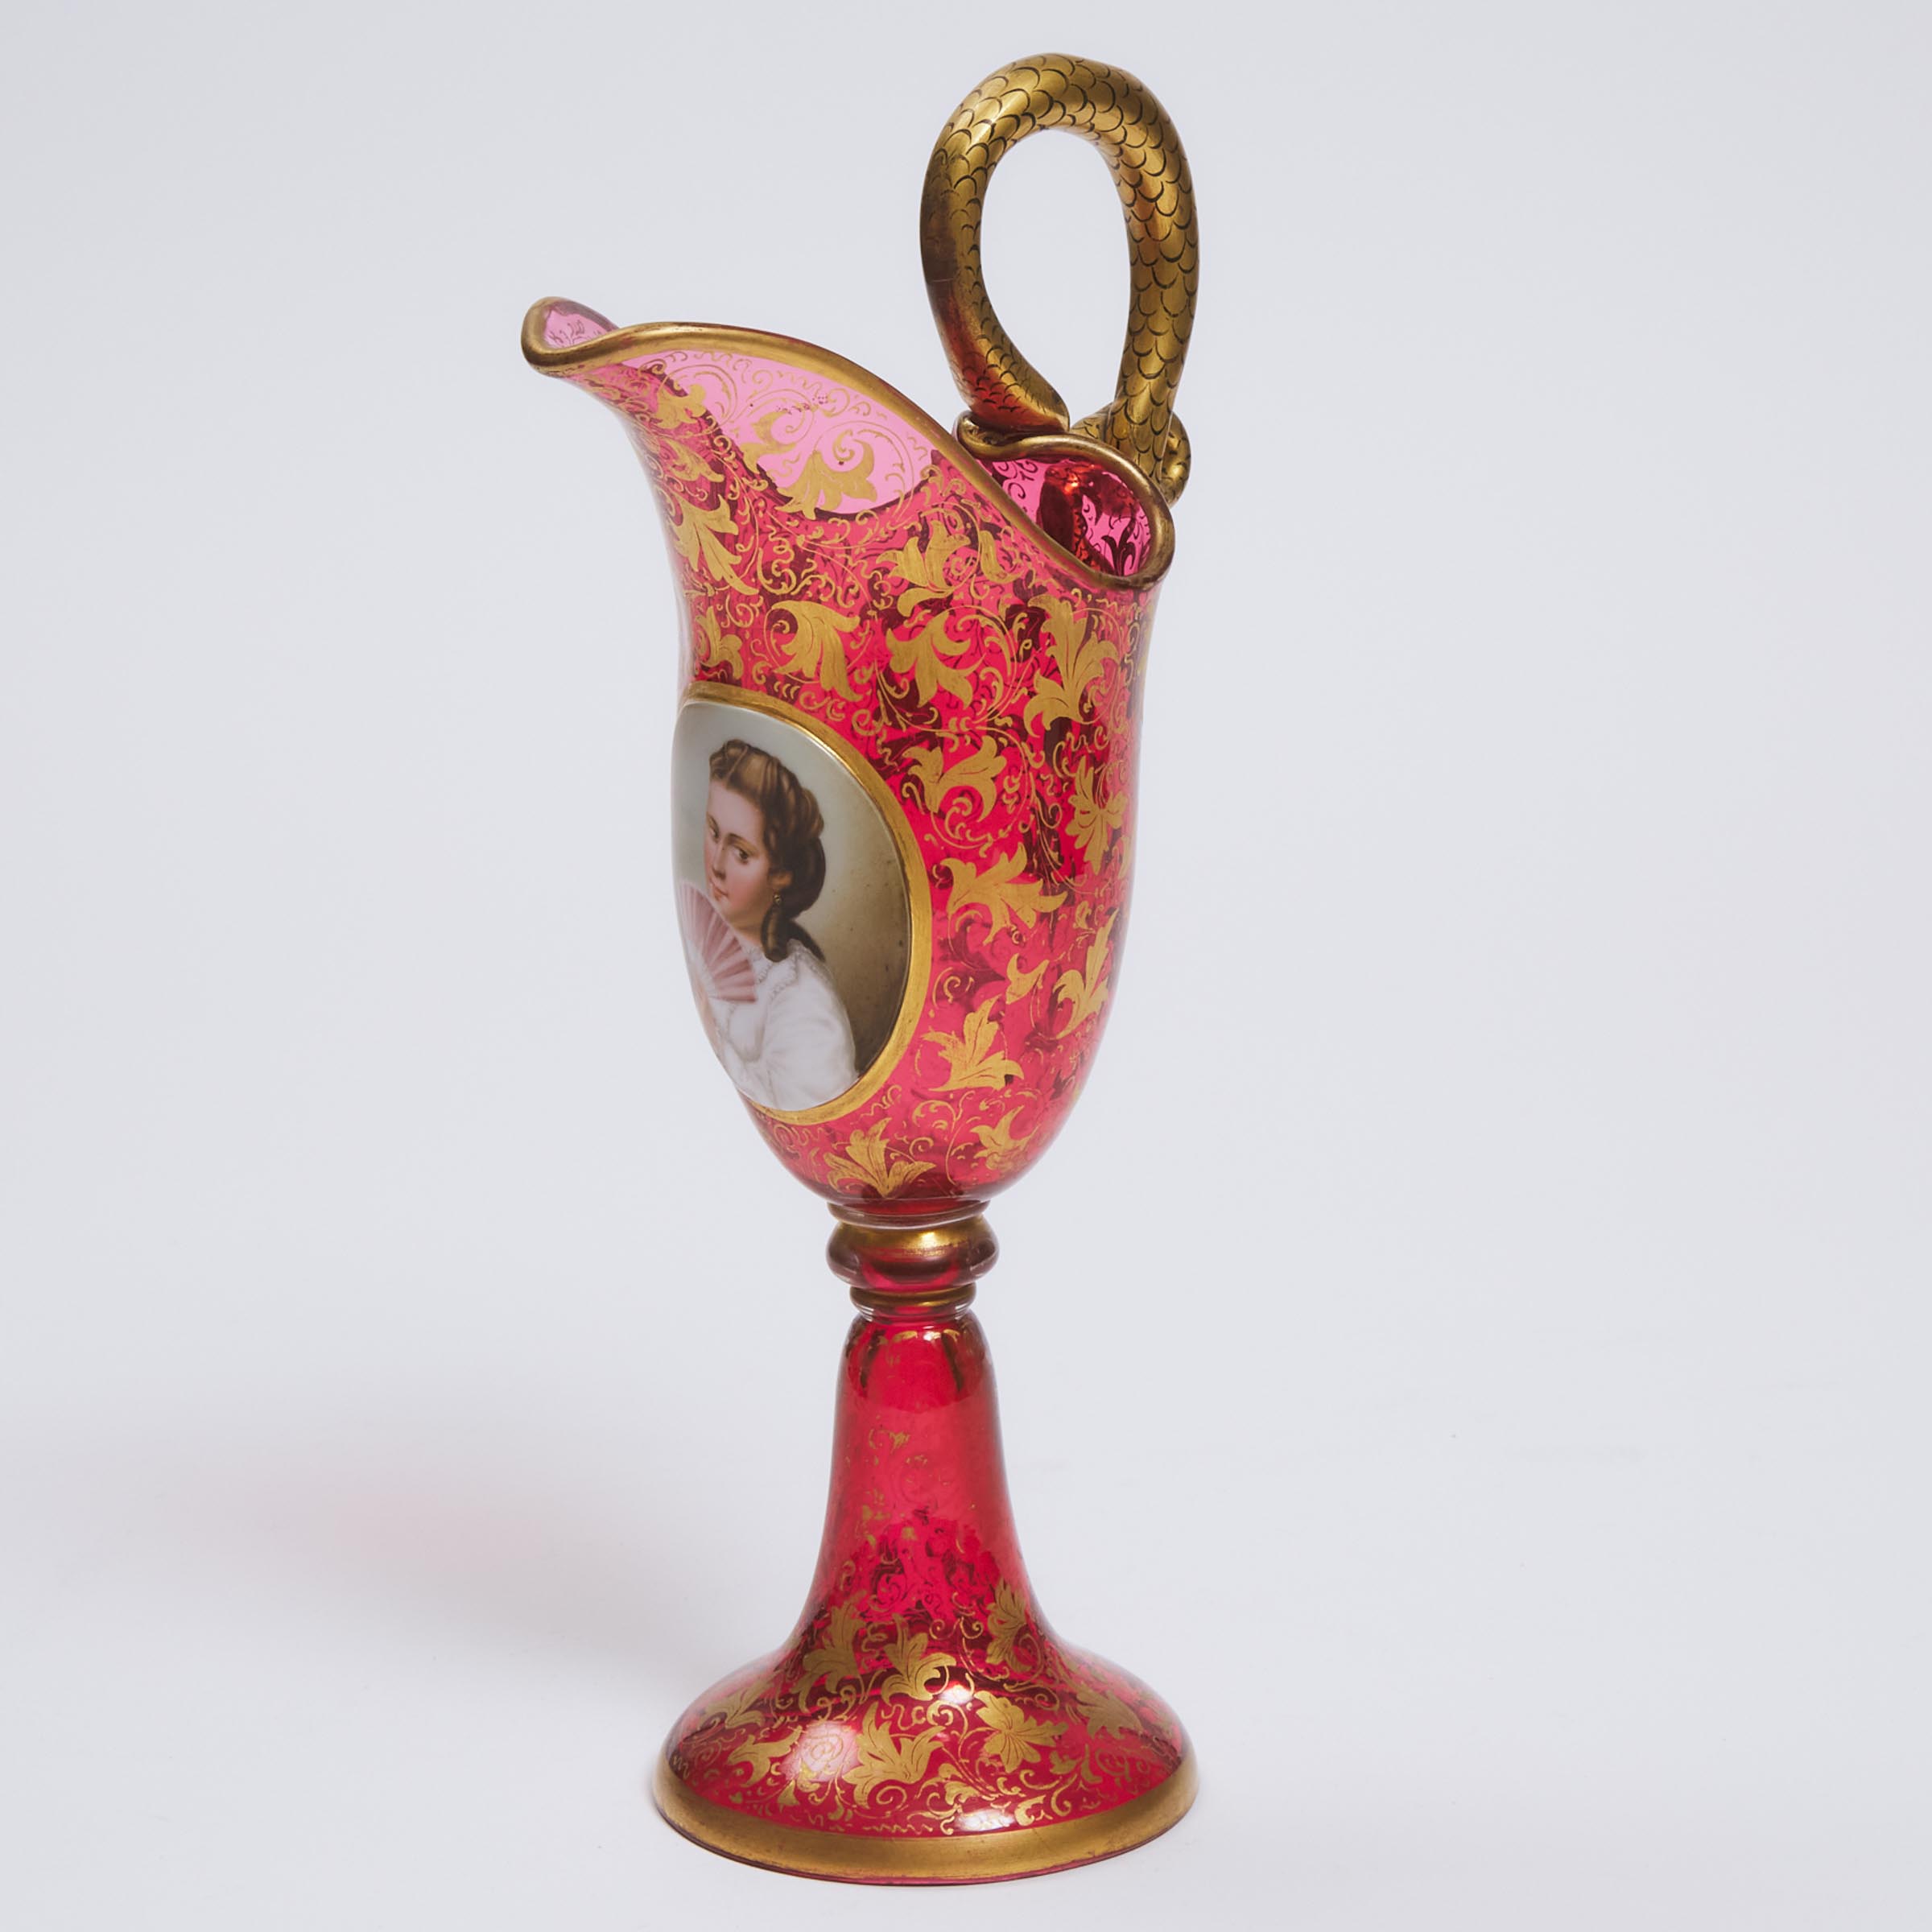 Bohemian Overlaid, Enameled and Gilt Red Glass Portrait Jug, late 19th century